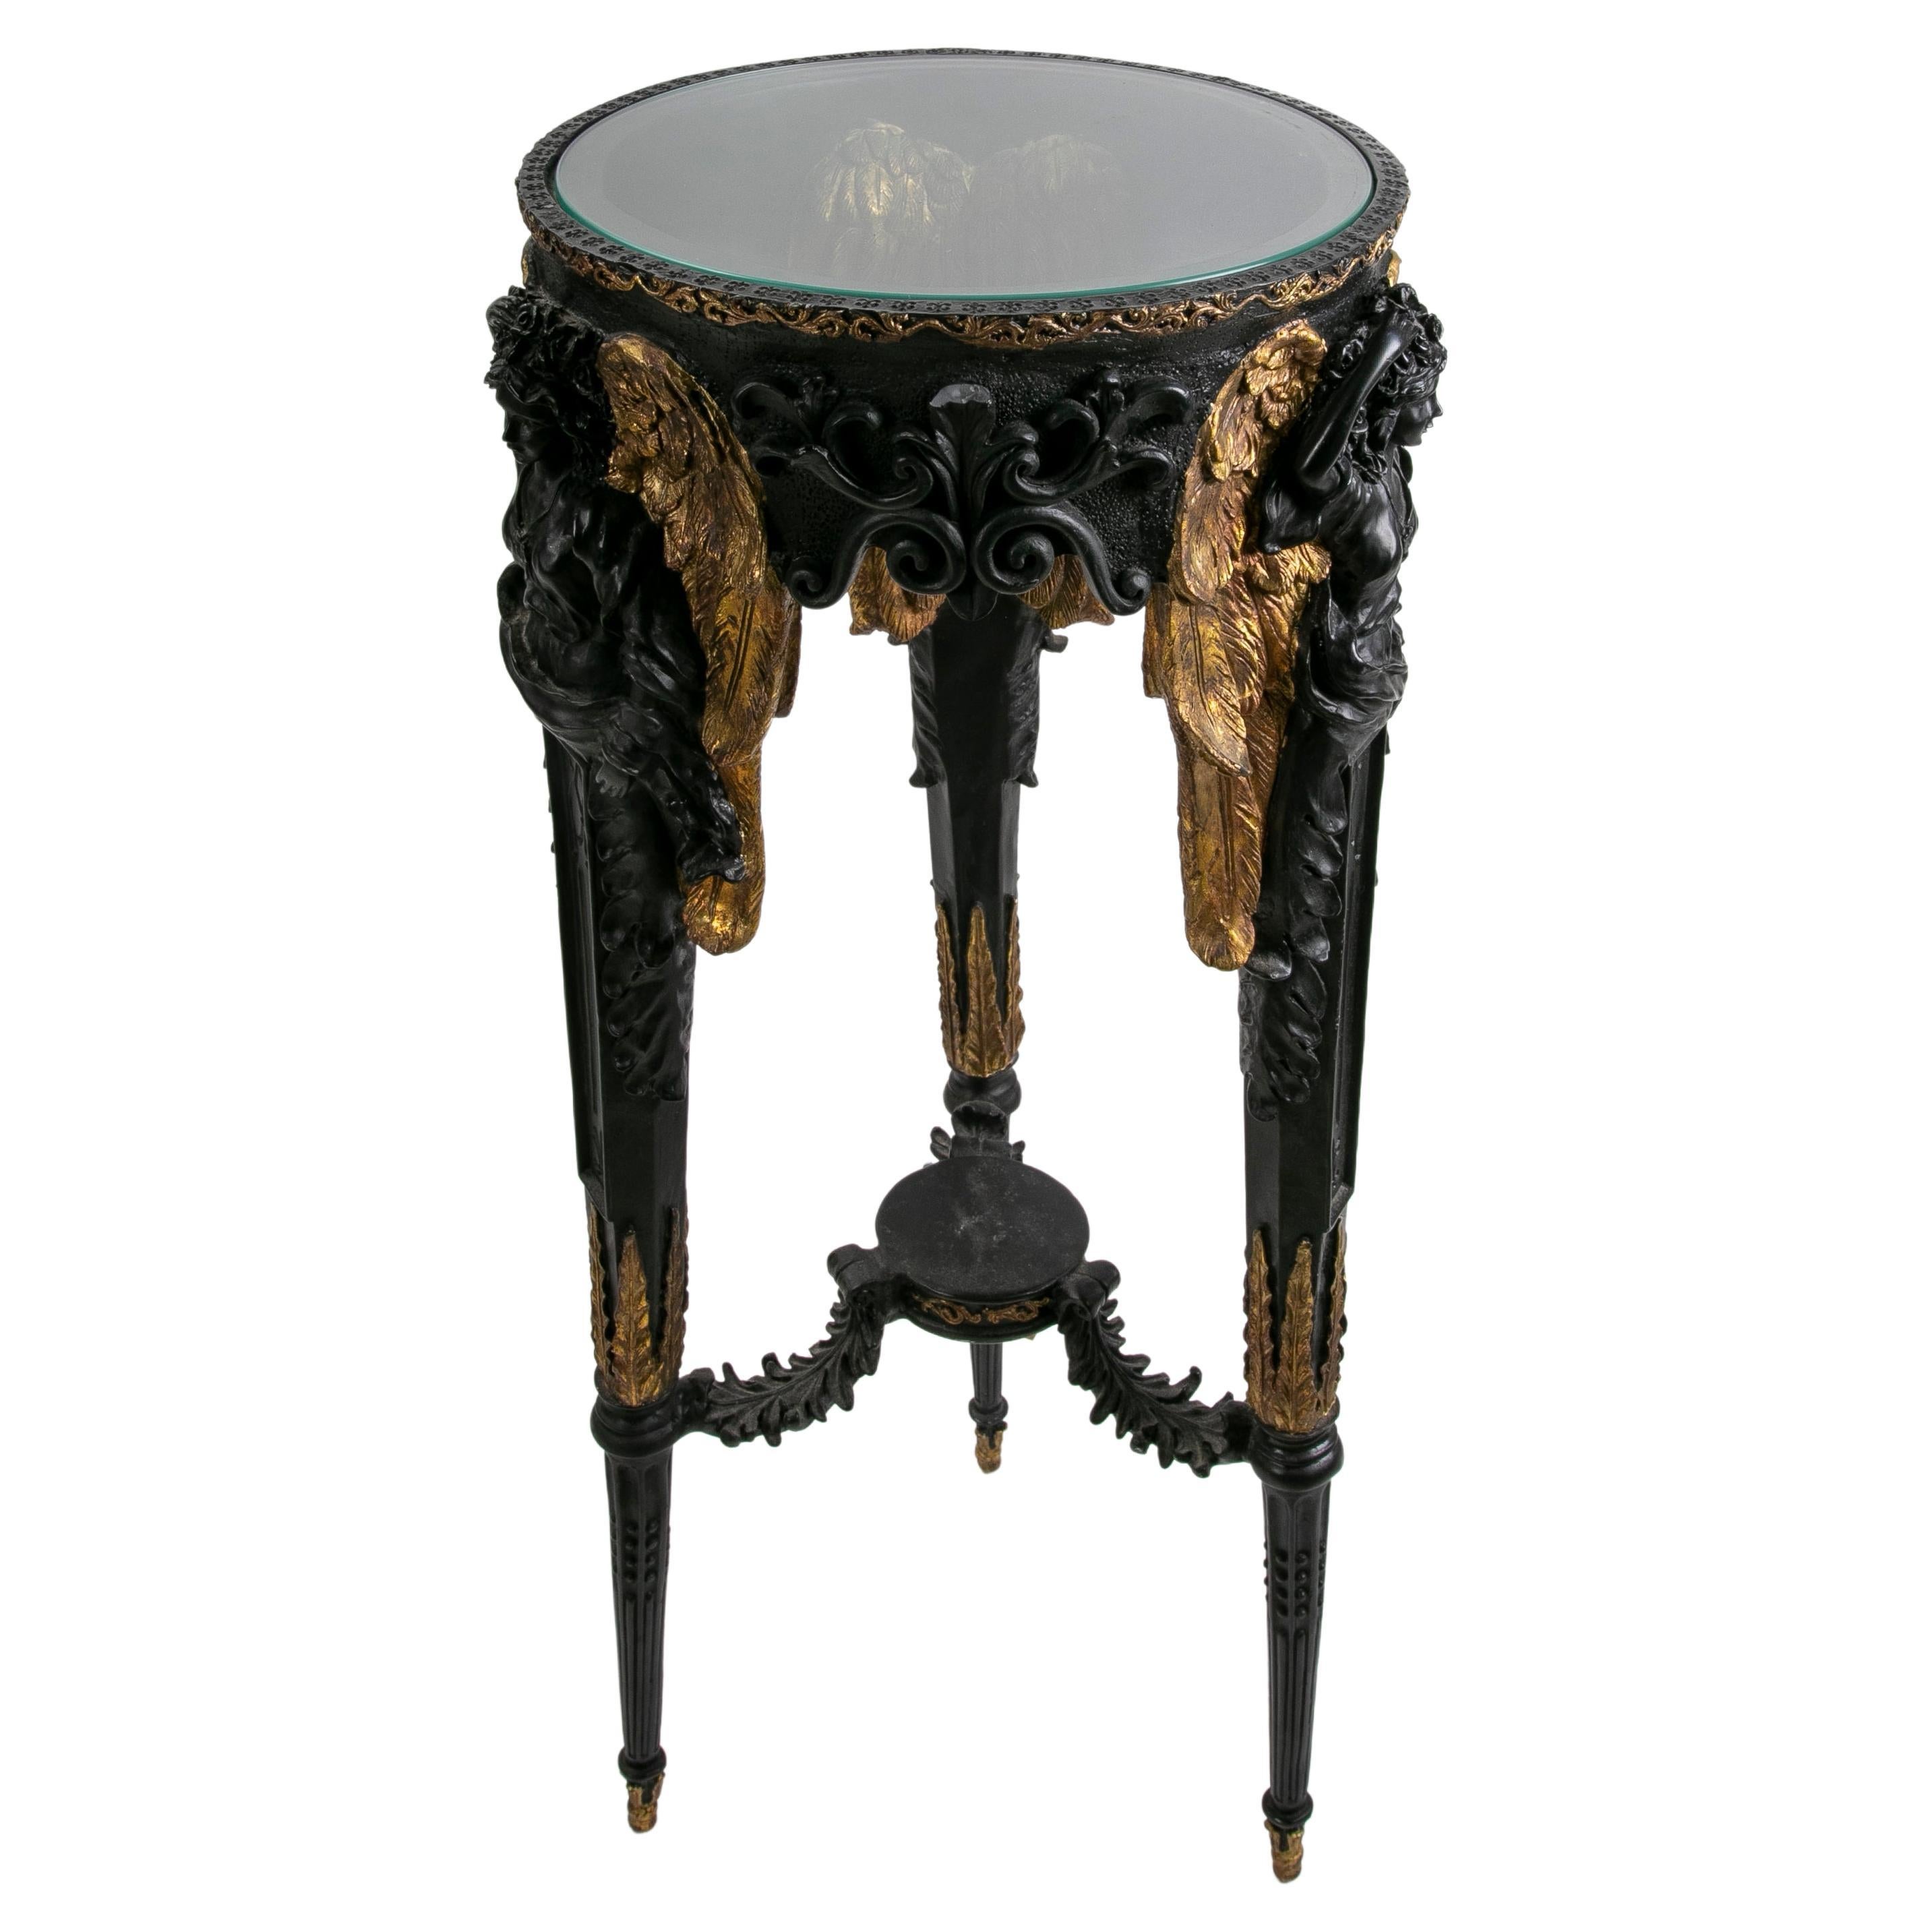 Polychromed Bronze Side Table with Winged Women on the Legs